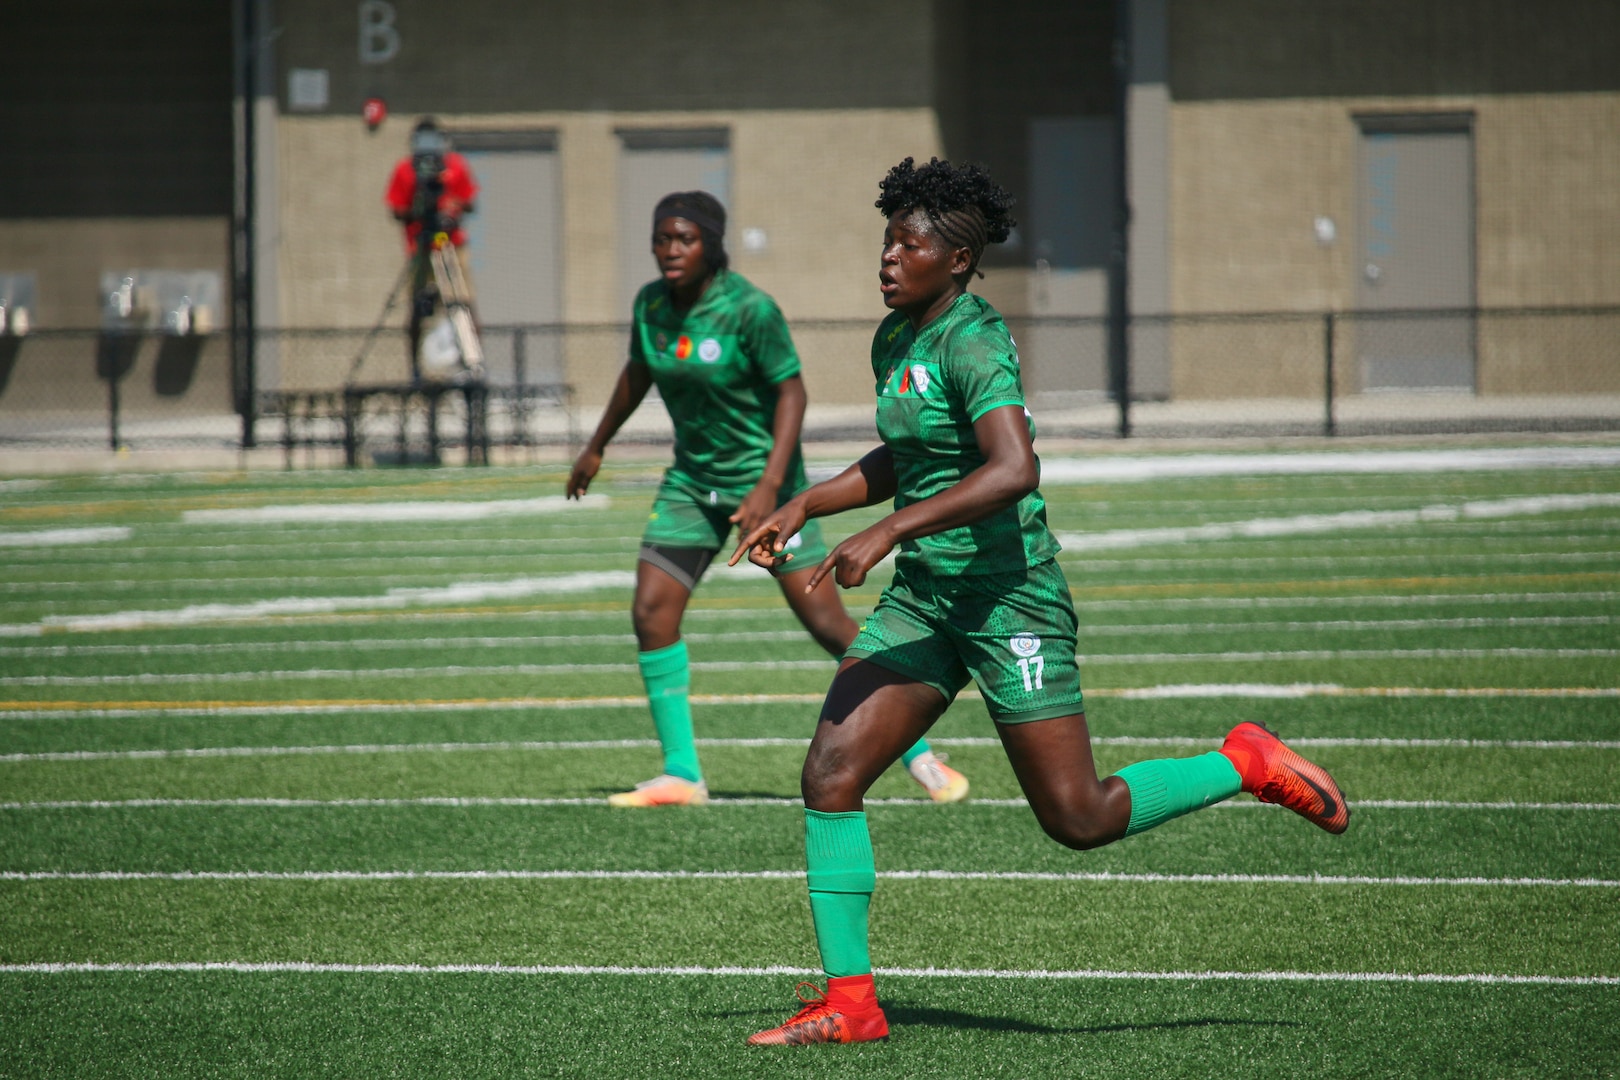 Cameroon's Ebika Tabe drives down the field on her way to score Cameroon's second goal of the match in a 3-0 victory over Germany in match 13 of the 13th Conseil International du Sport Militaire (CISM) World Women's Military Football Championship hosted by Fairchild Air Force Base in Spokane, Washingon.  This year's championship features teams from the United States, Belgium, Cameroon, Canada, France, Germany, Ireland, Mali, Netherlands, and South Korea.  (Department of Defense Photo by Mr. Steven Dinote, released).